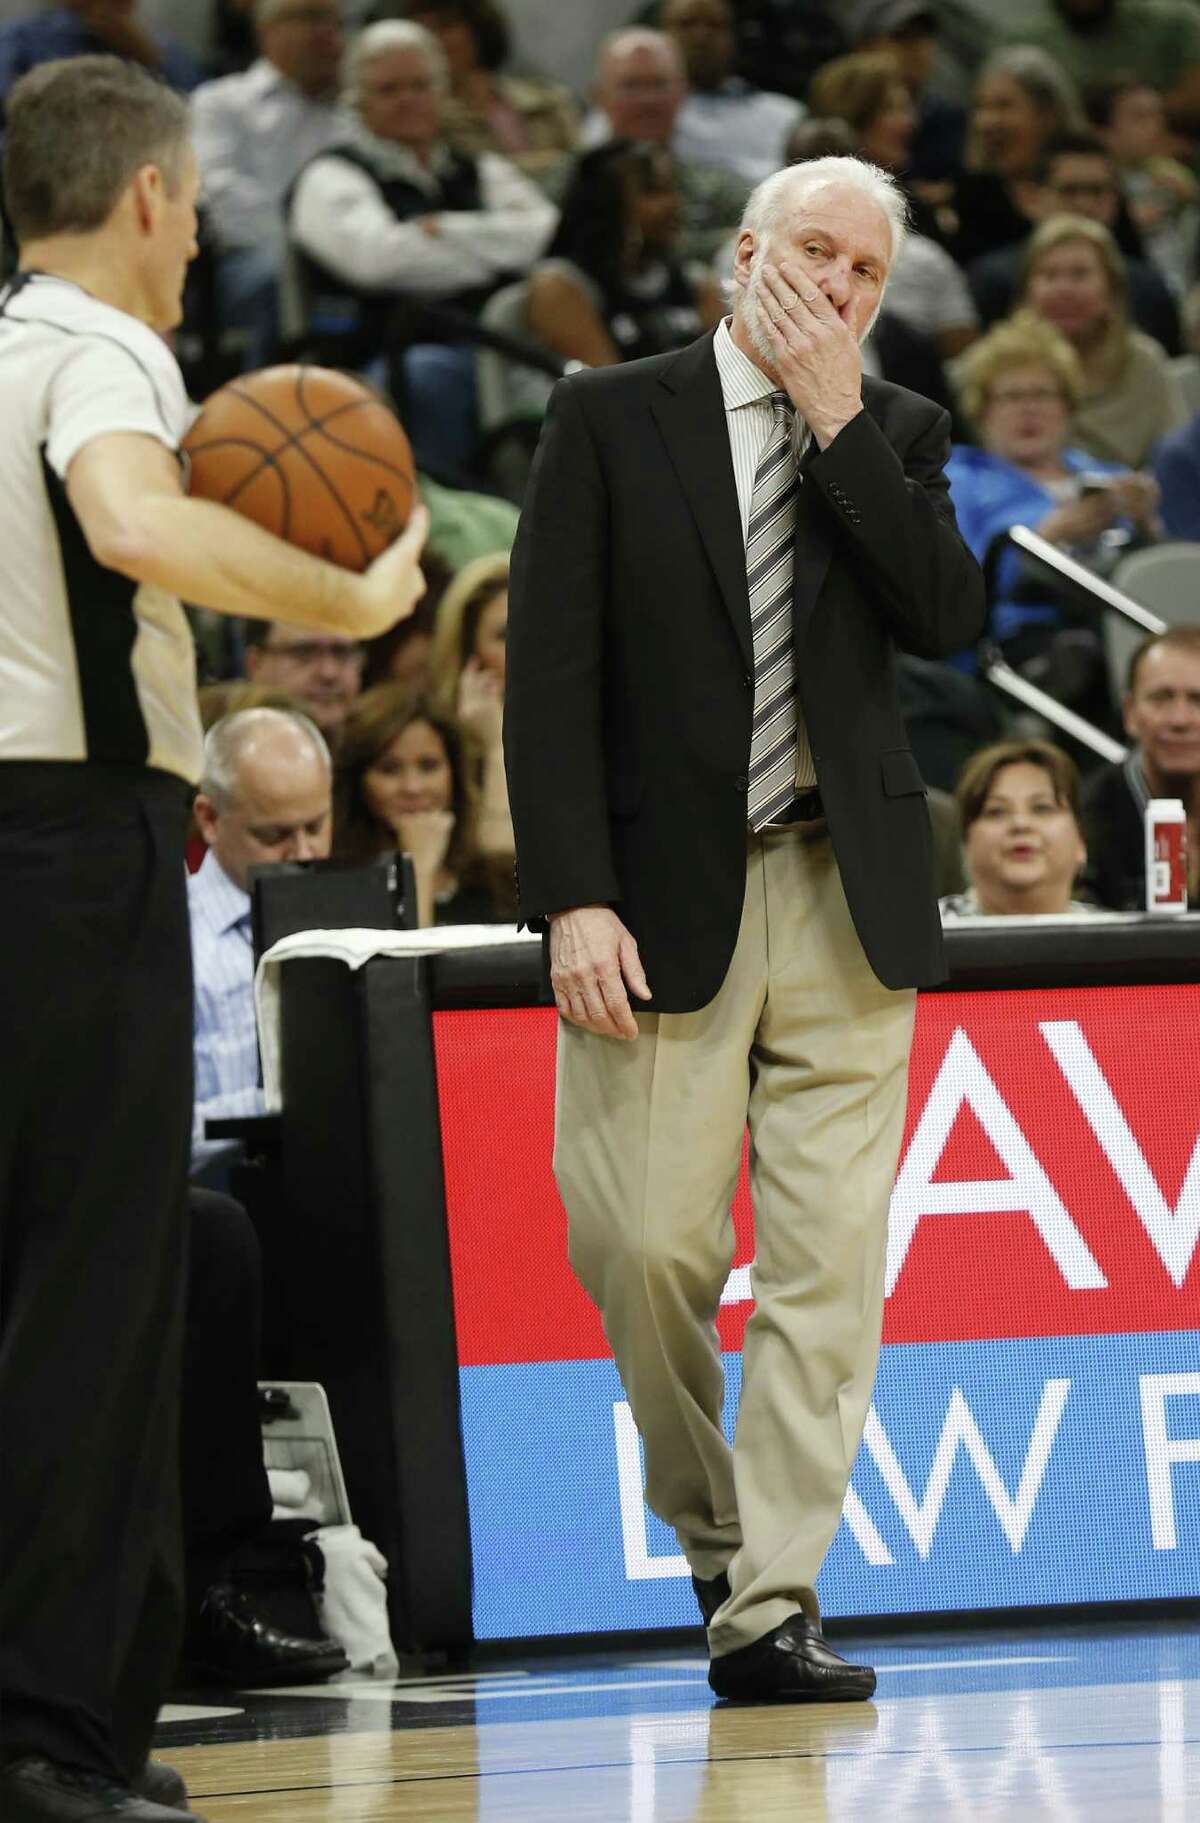 Spurs coach Gregg Popovich restrains himself from commenting during the game against the Oklahoma City Thunder at the AT&T Center on Jan. 31, 2017.